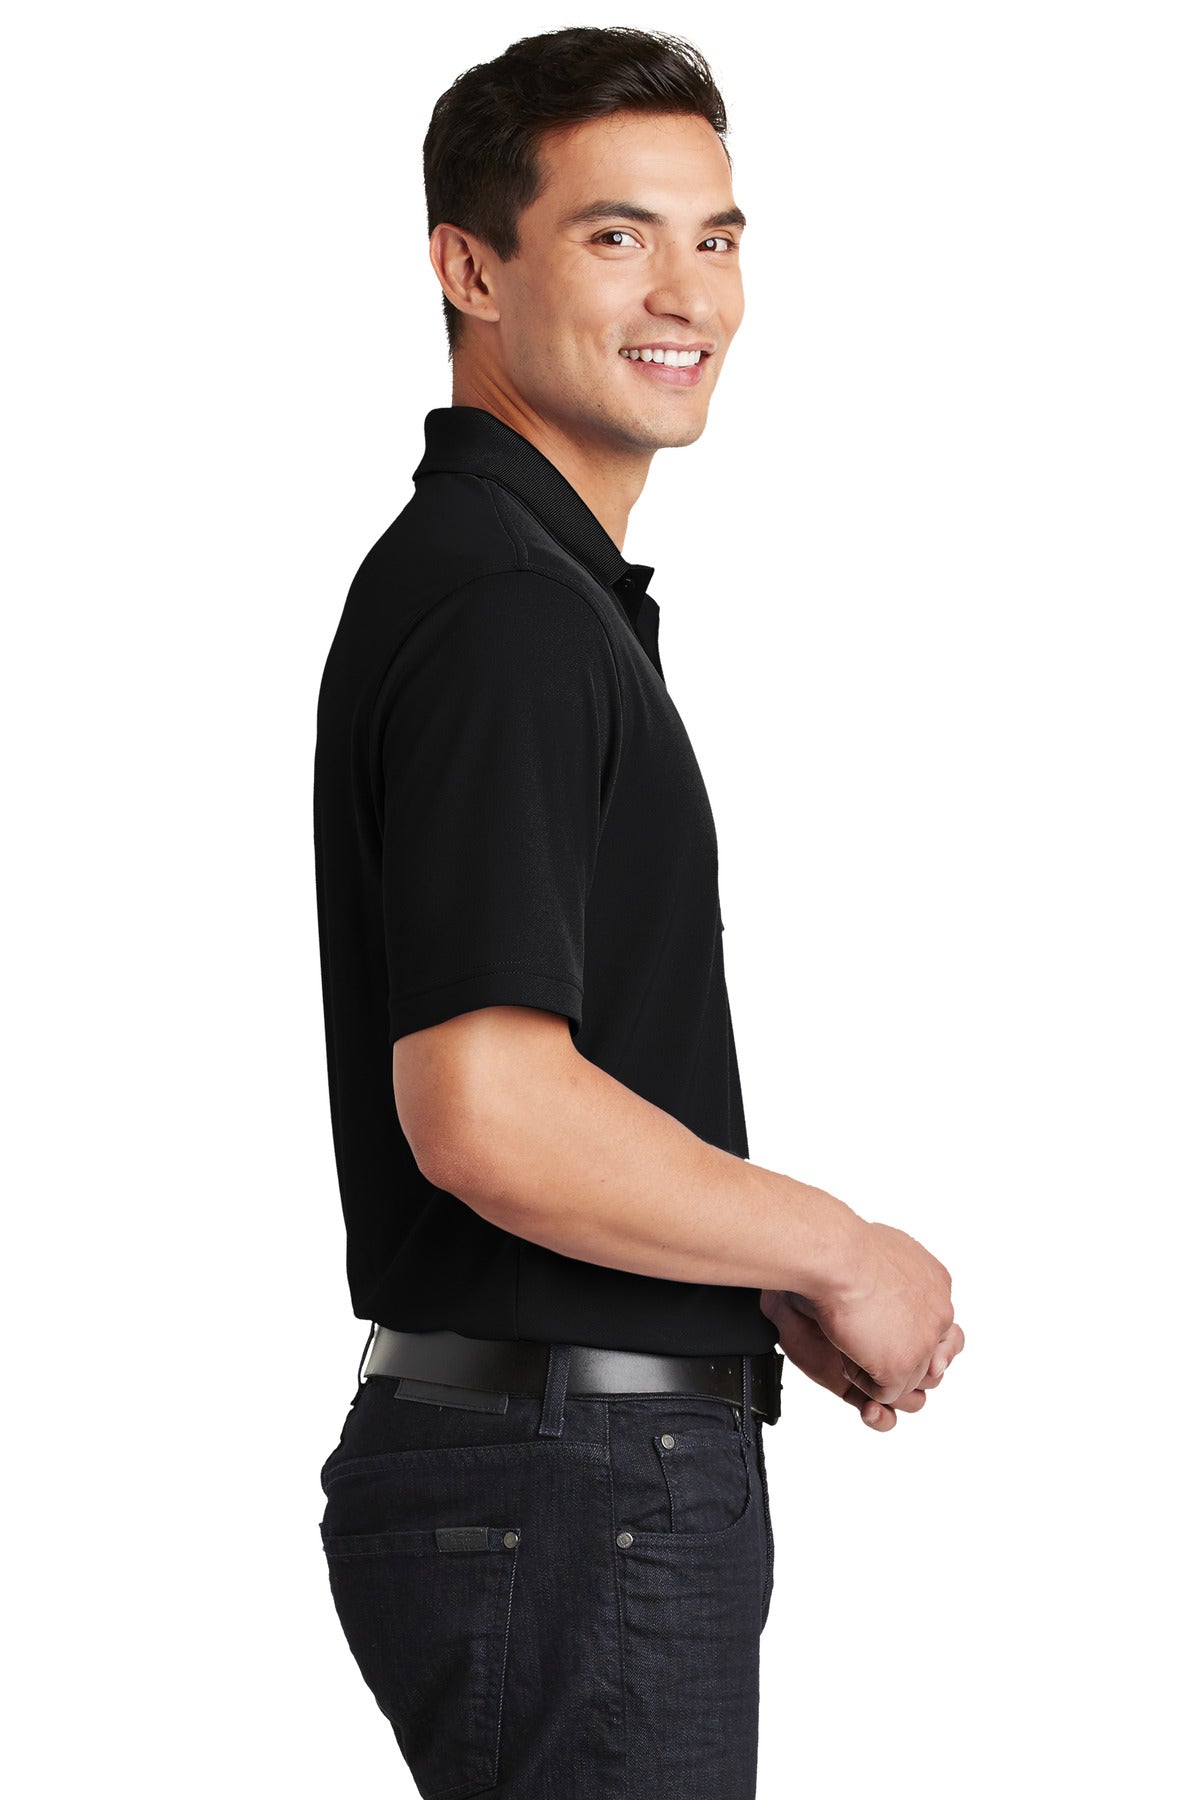 Swaasi Core - Port Authority® POCKET Dry Zone® UV Micro-Mesh Polo with EMB Logo